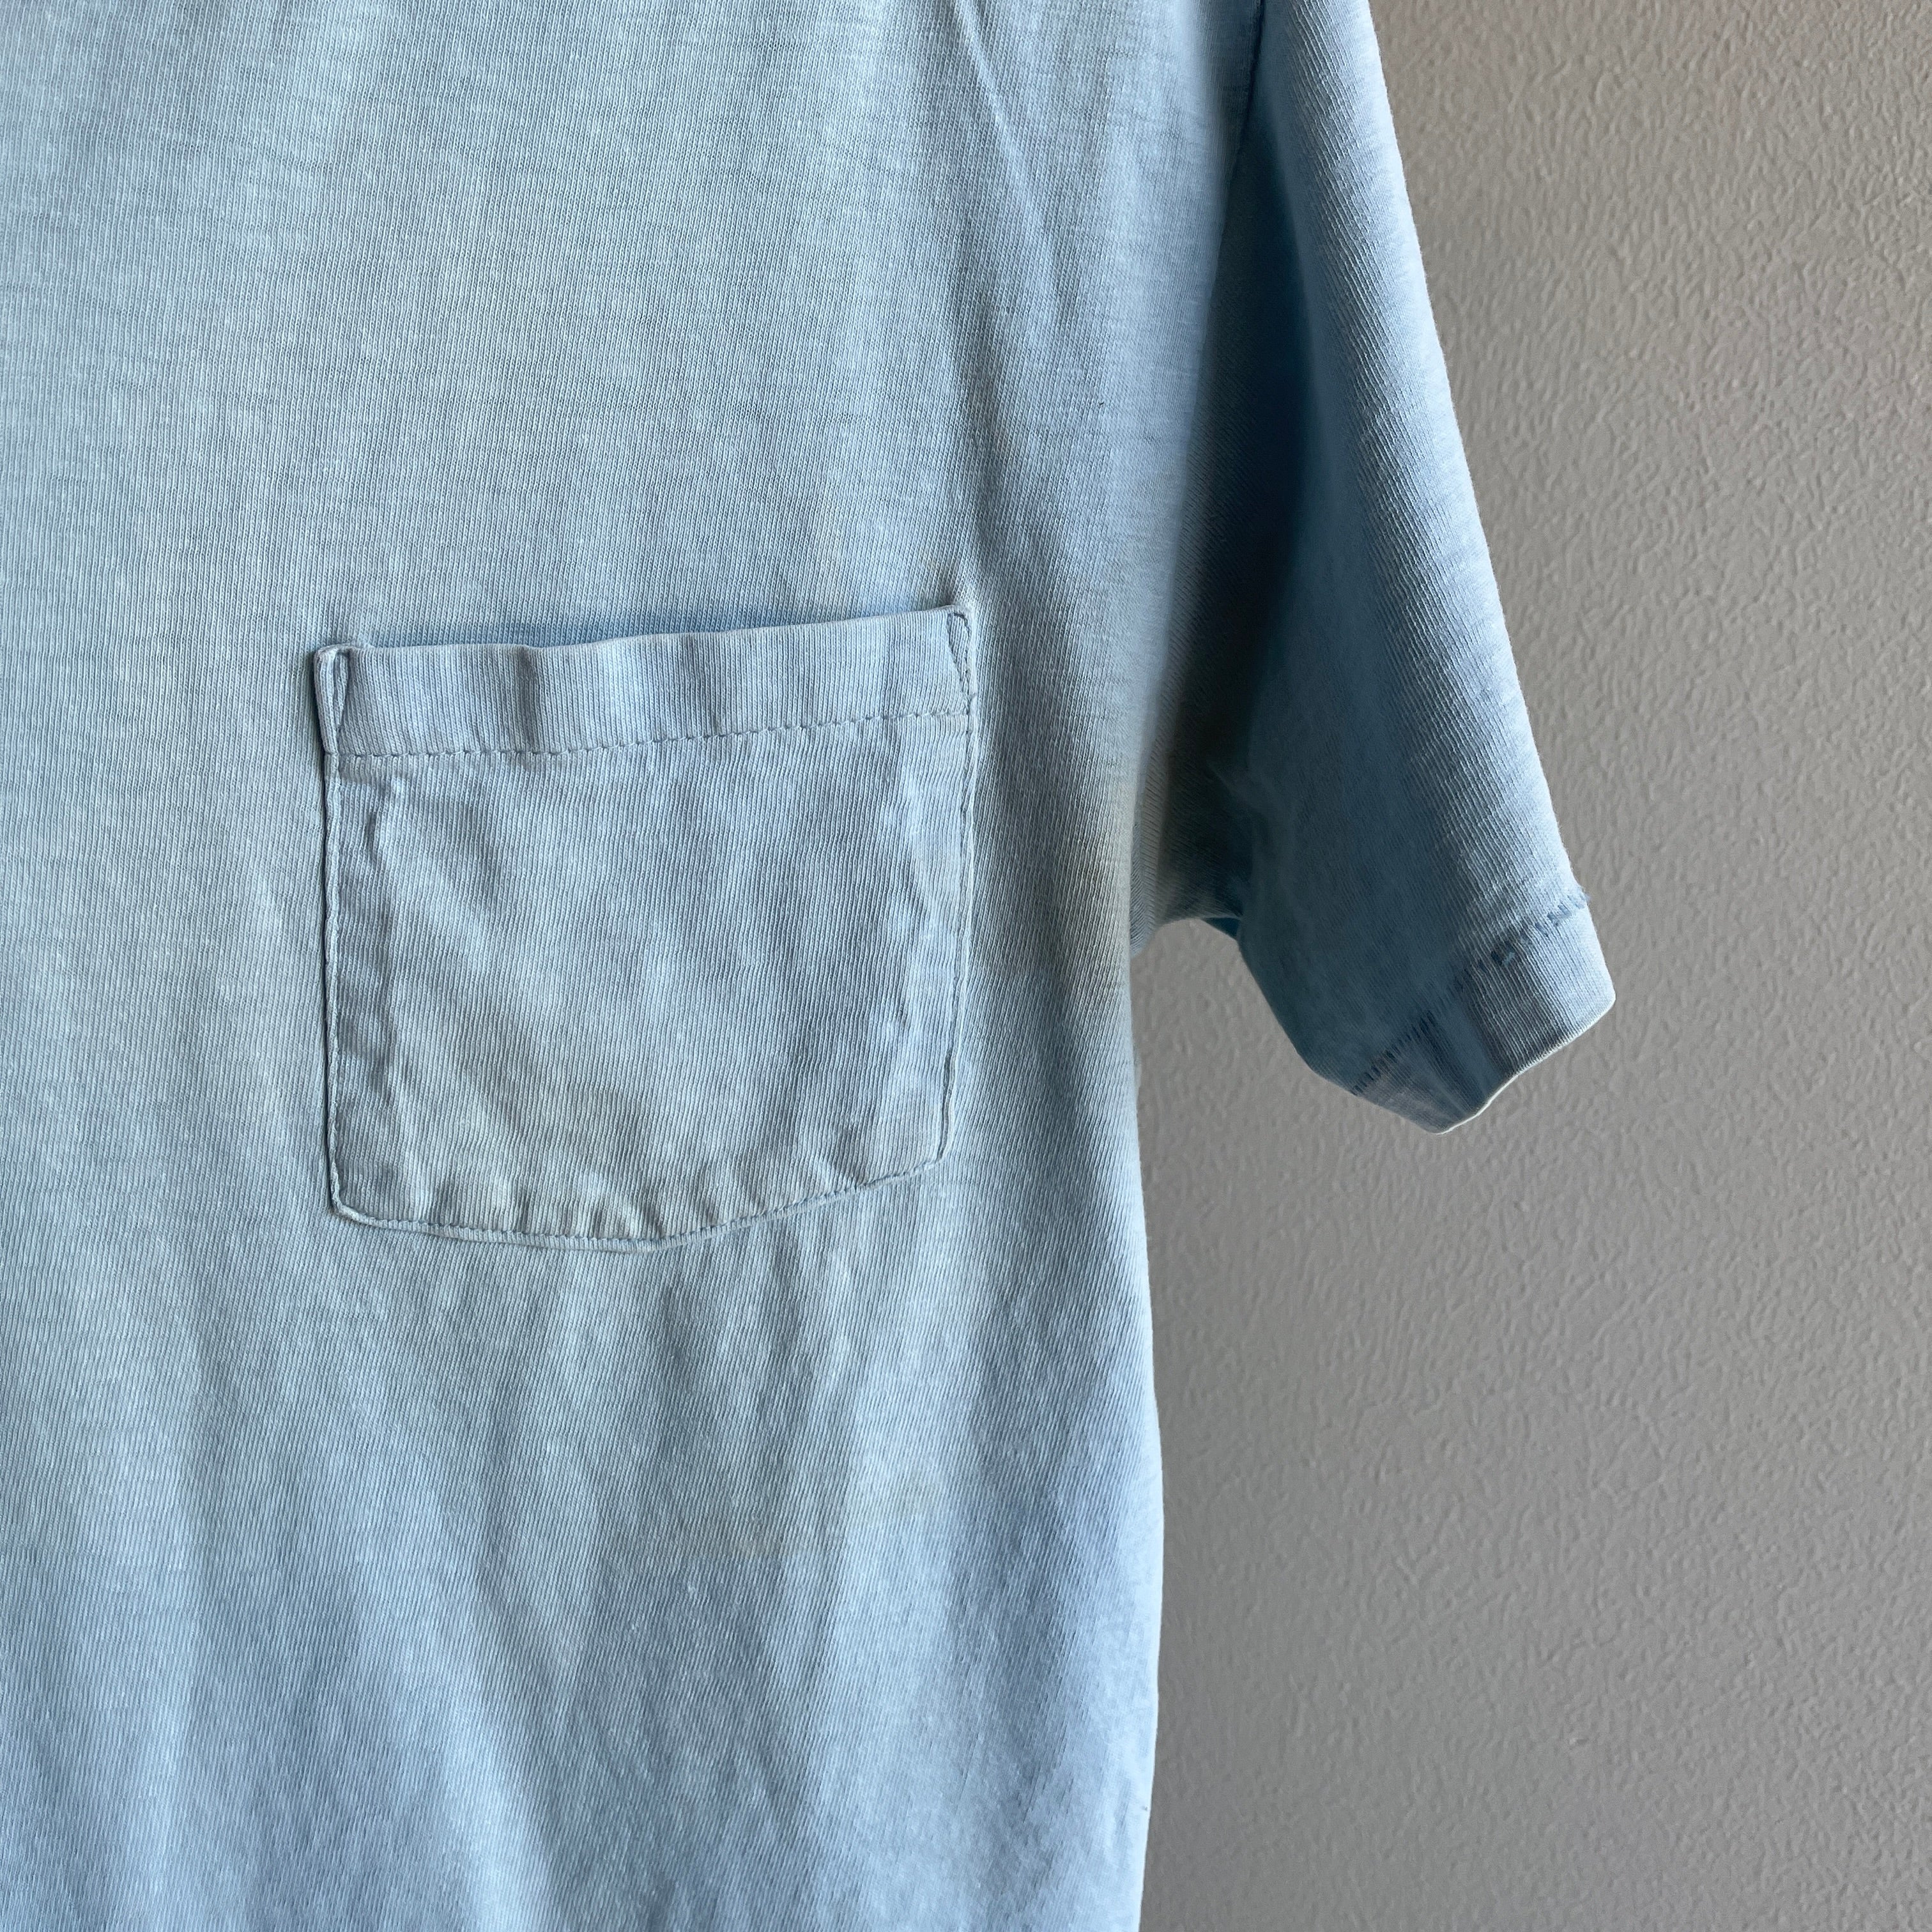 GG 1980s Super Faded and Stained Light Baby Blue Cotton Pocket T-Shirt